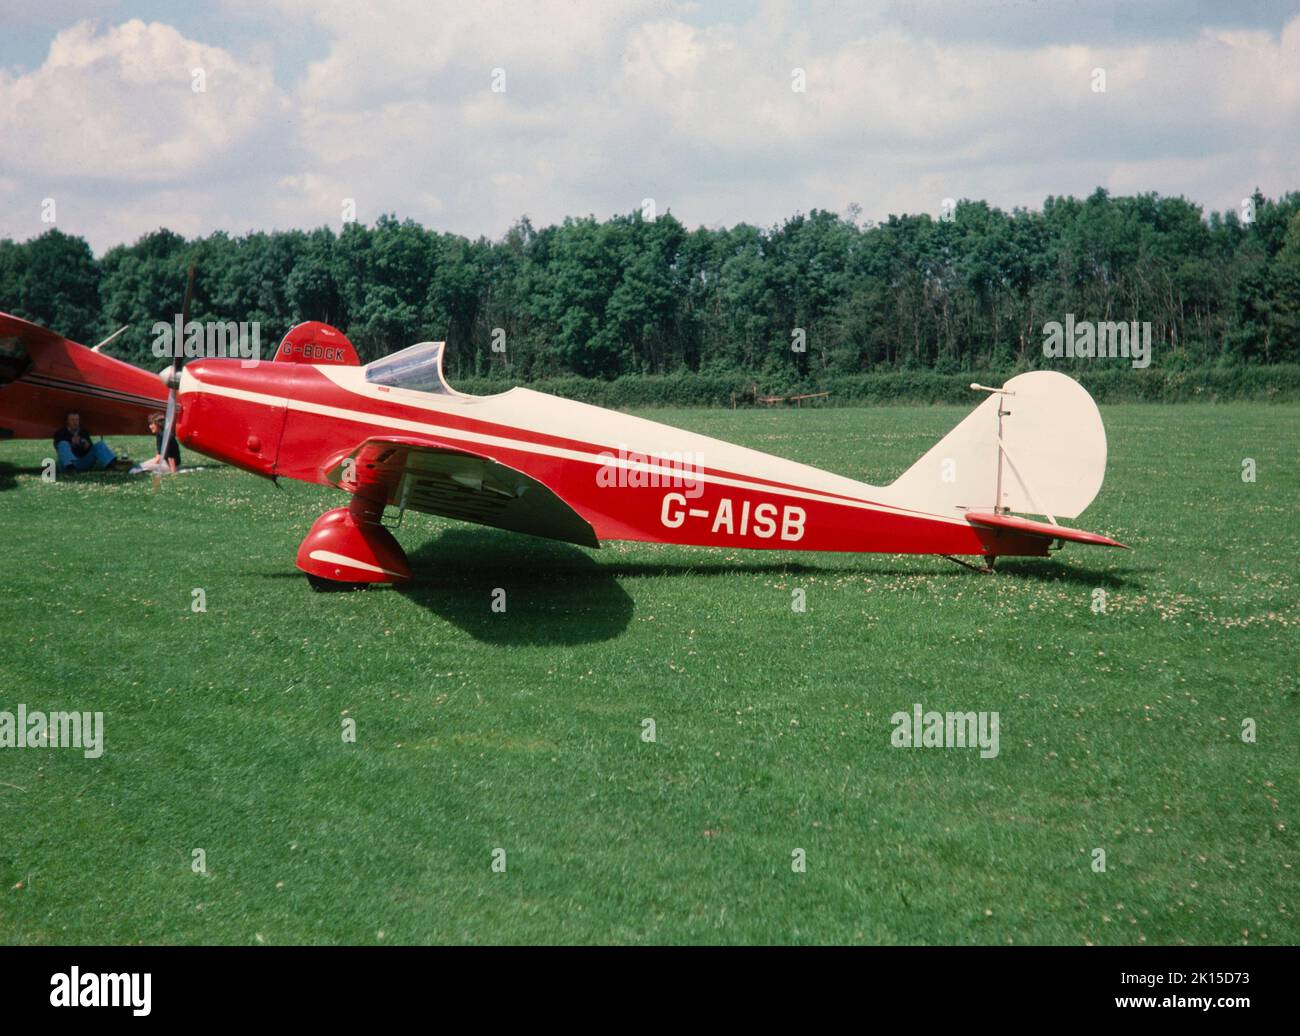 A Tipsy Trainer I aircraft, registered in the UK as G-AISB. Built in 1948. Stock Photo